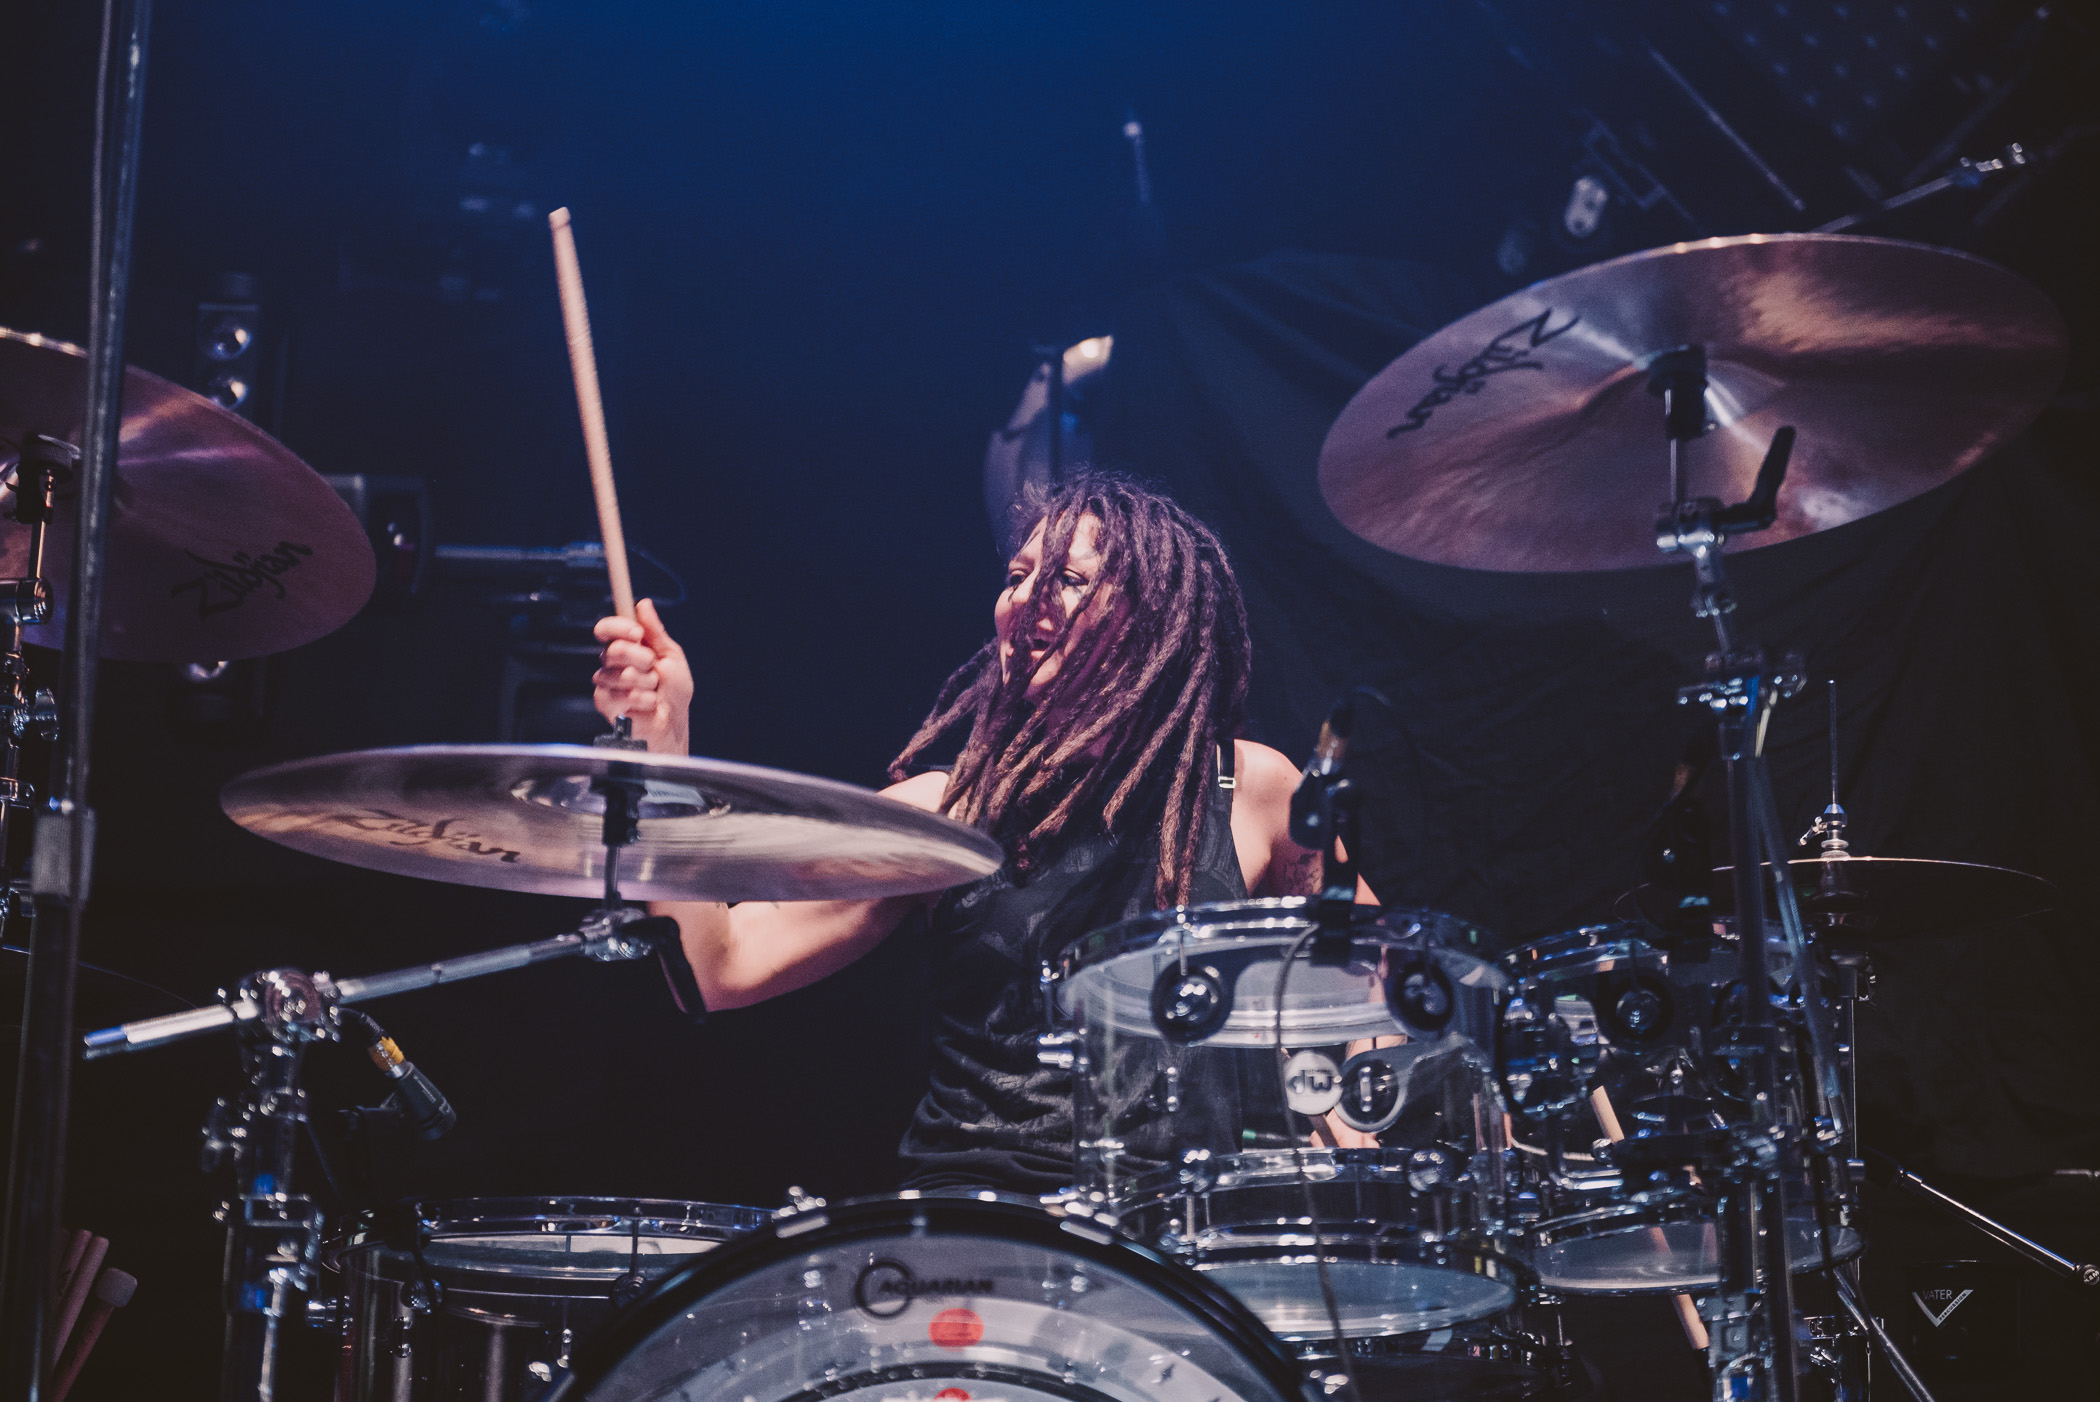 3_The_Dead_Deads-Abbotsford_Centre-Timothy_Nguyen-20180127 (2 of 15).jpg